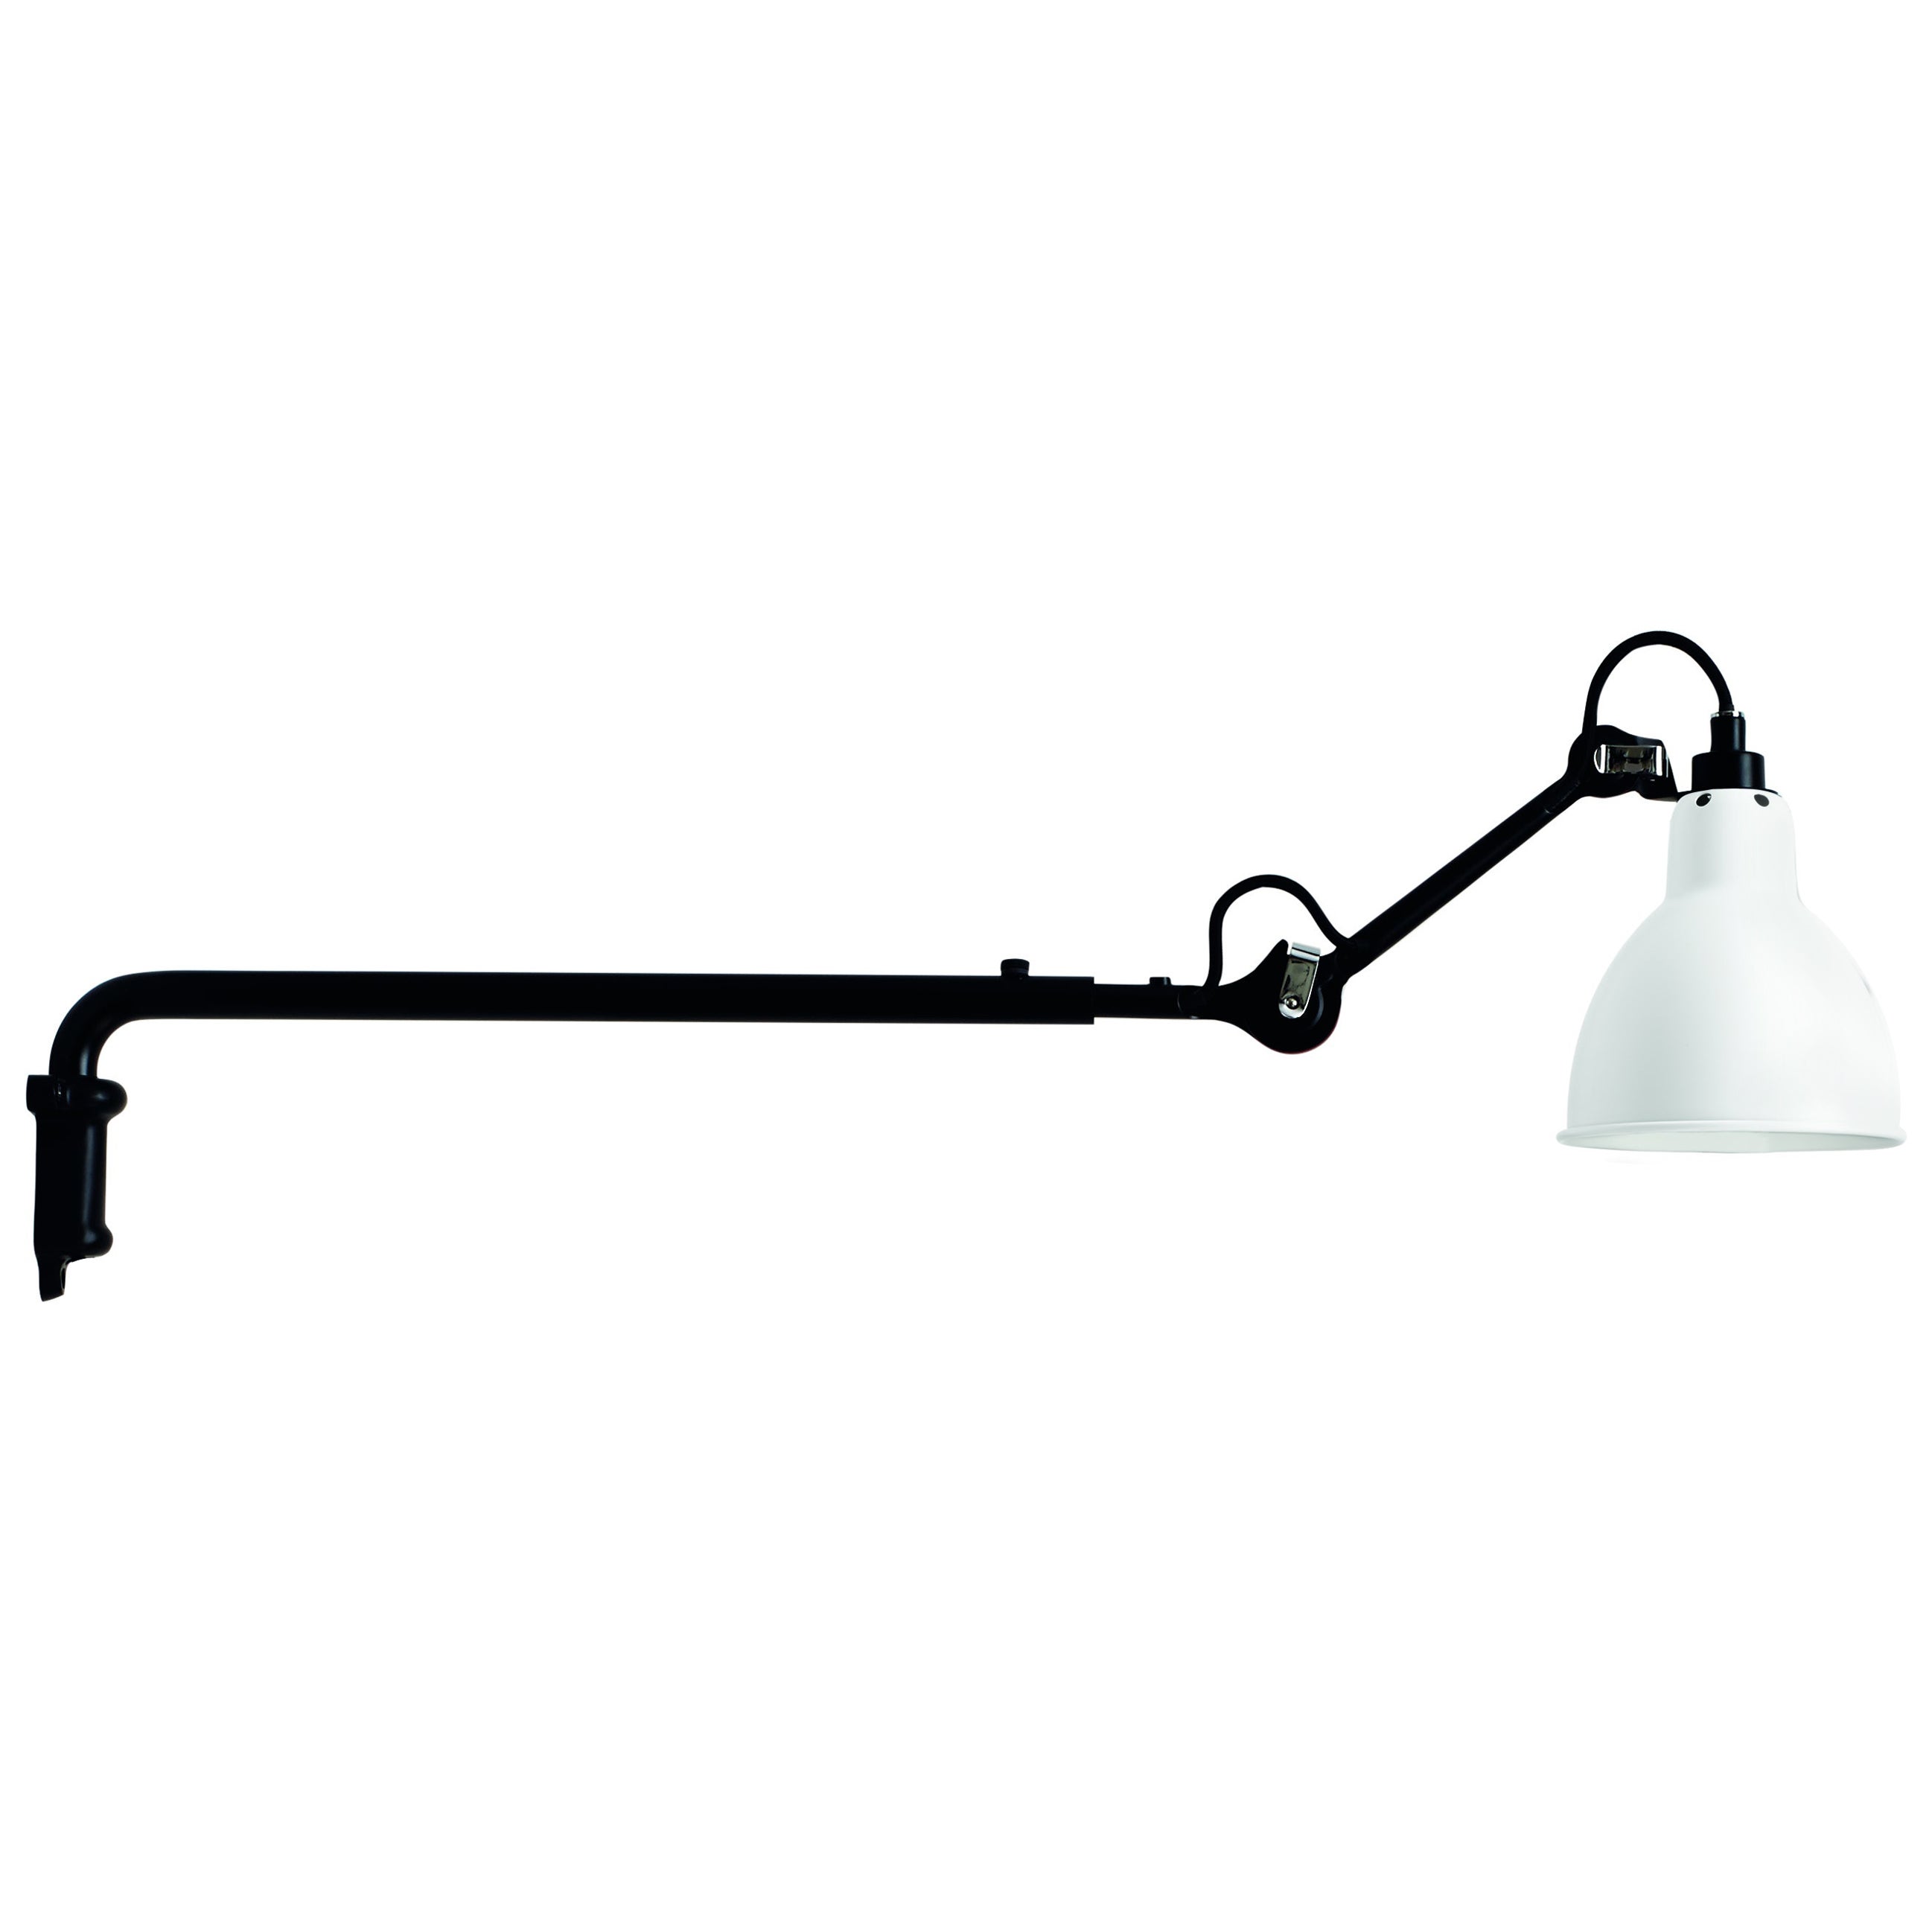 DCW Editions La Lampe Gras N°203 Wall Lamp in Black Steel Arm and White Shade